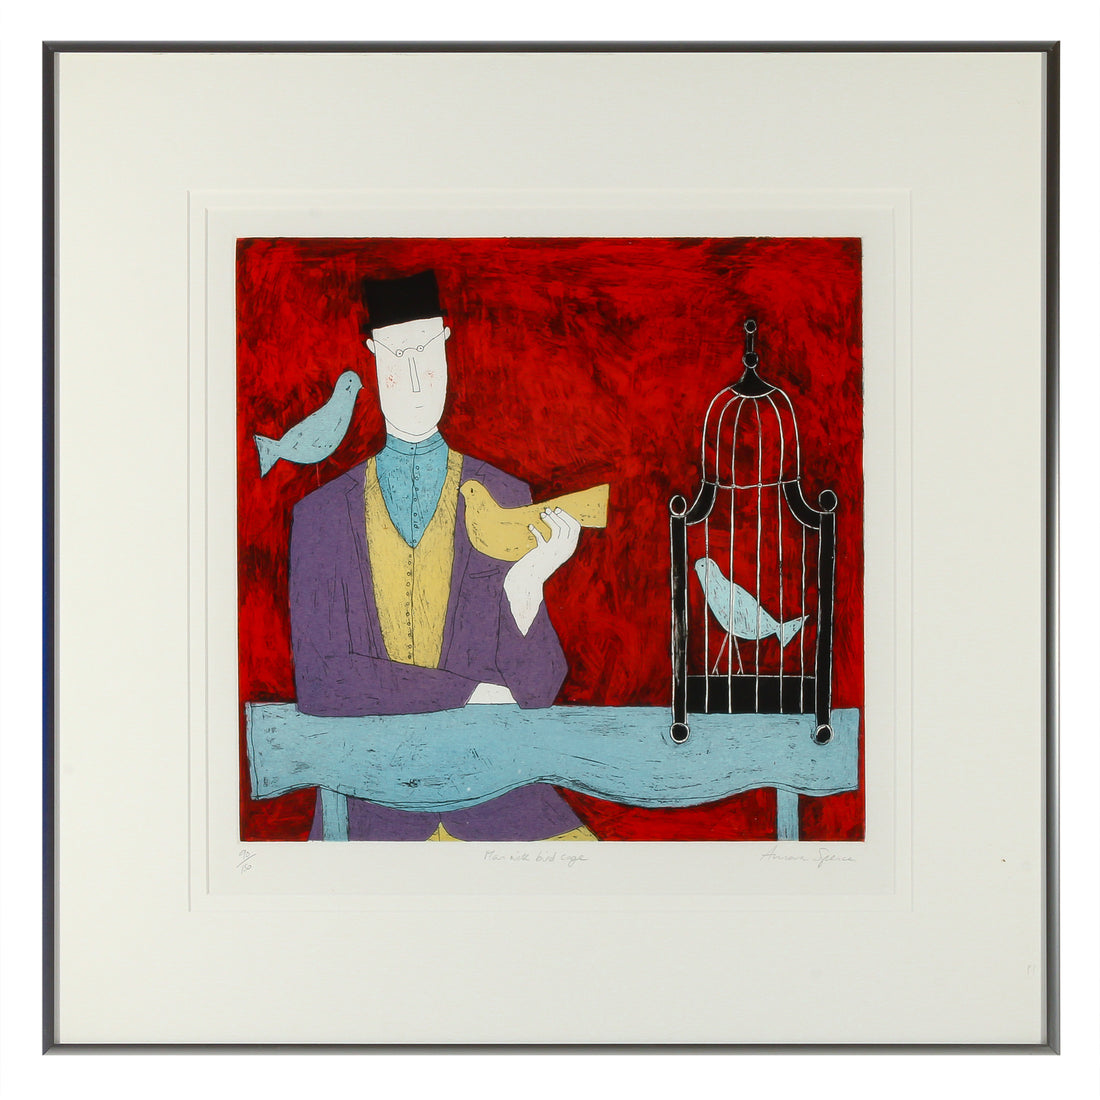 Annora Spence - "Man With Bird Cage" - Silkscreen/Serigraph on Paper